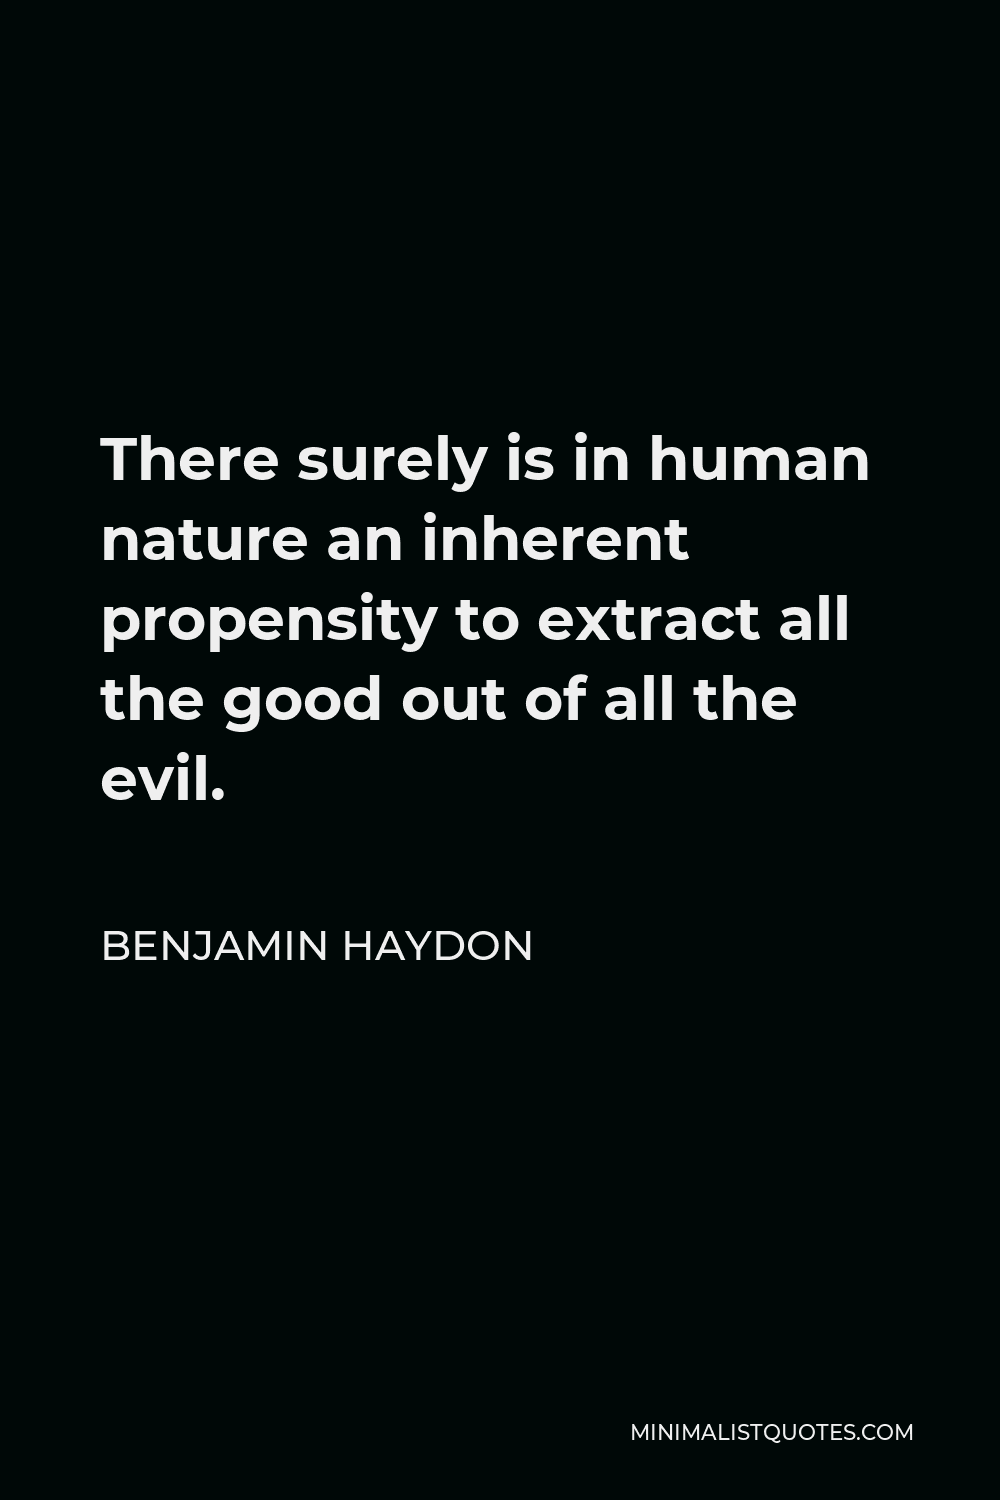 Benjamin Haydon Quote - There surely is in human nature an inherent propensity to extract all the good out of all the evil.